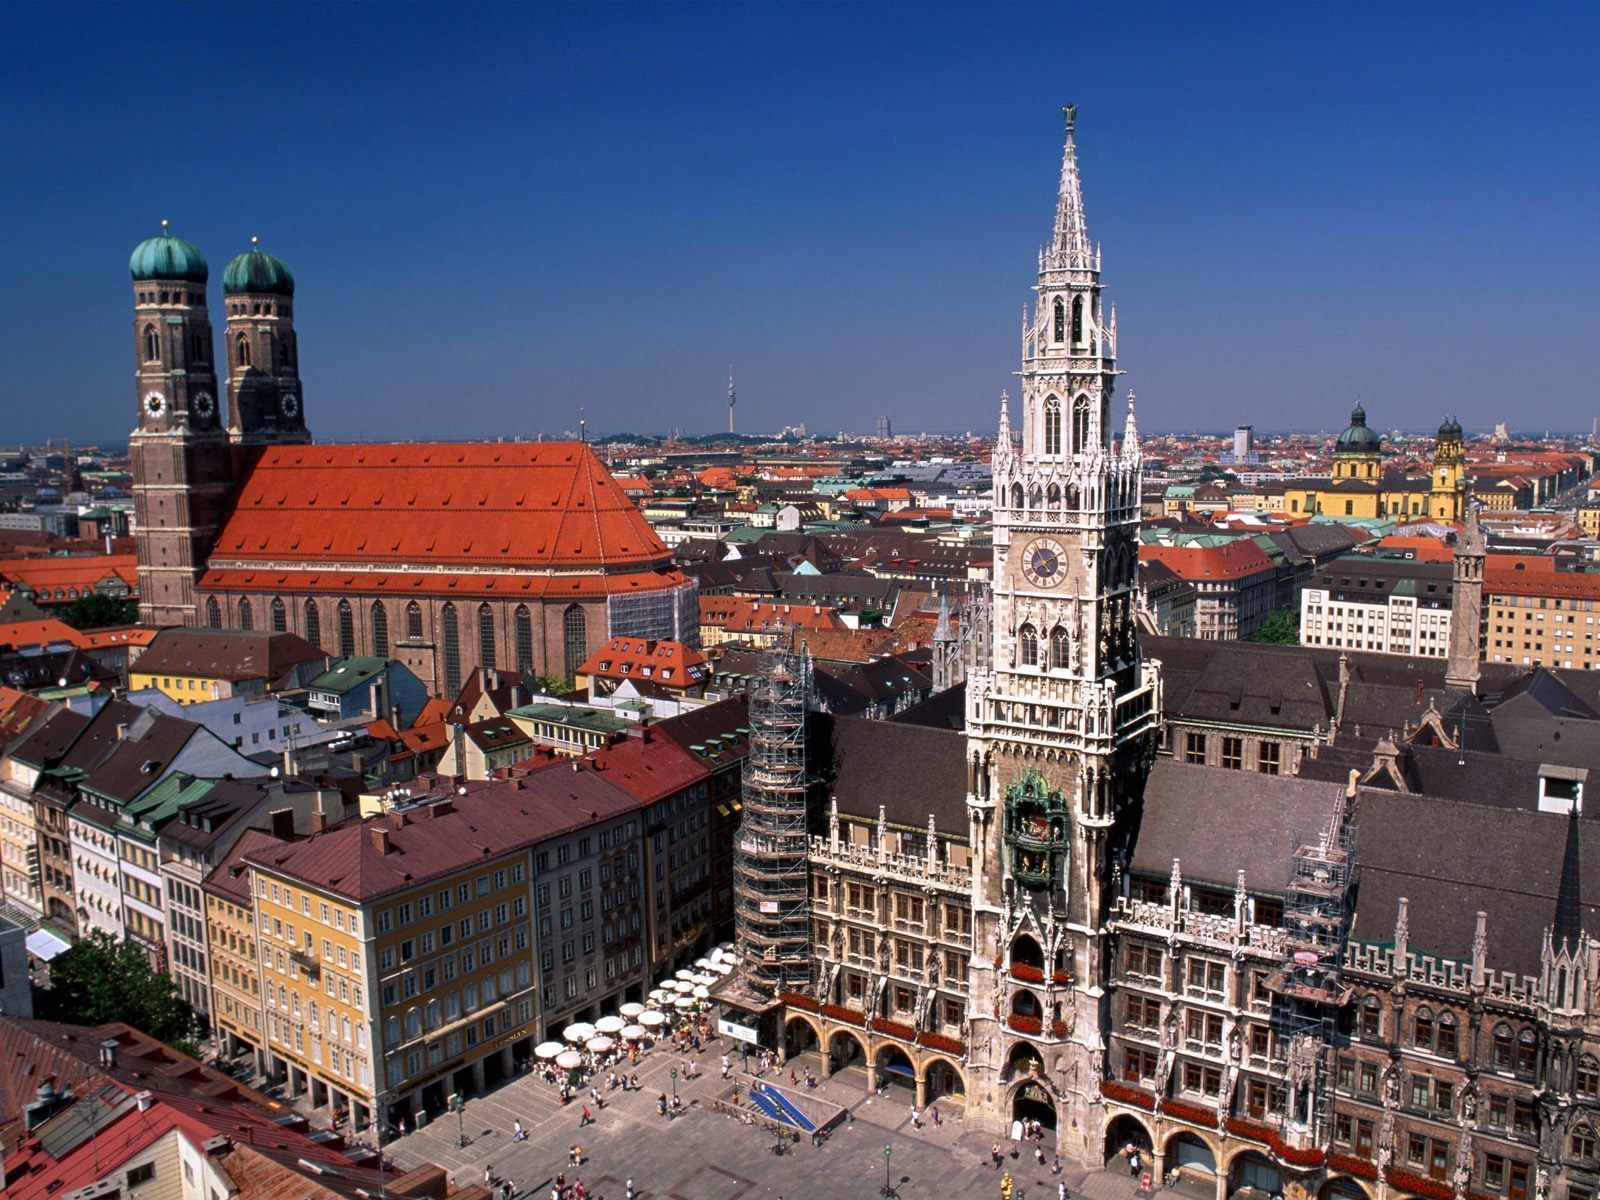 Pleasant Day, Munich, Germany wallpapers